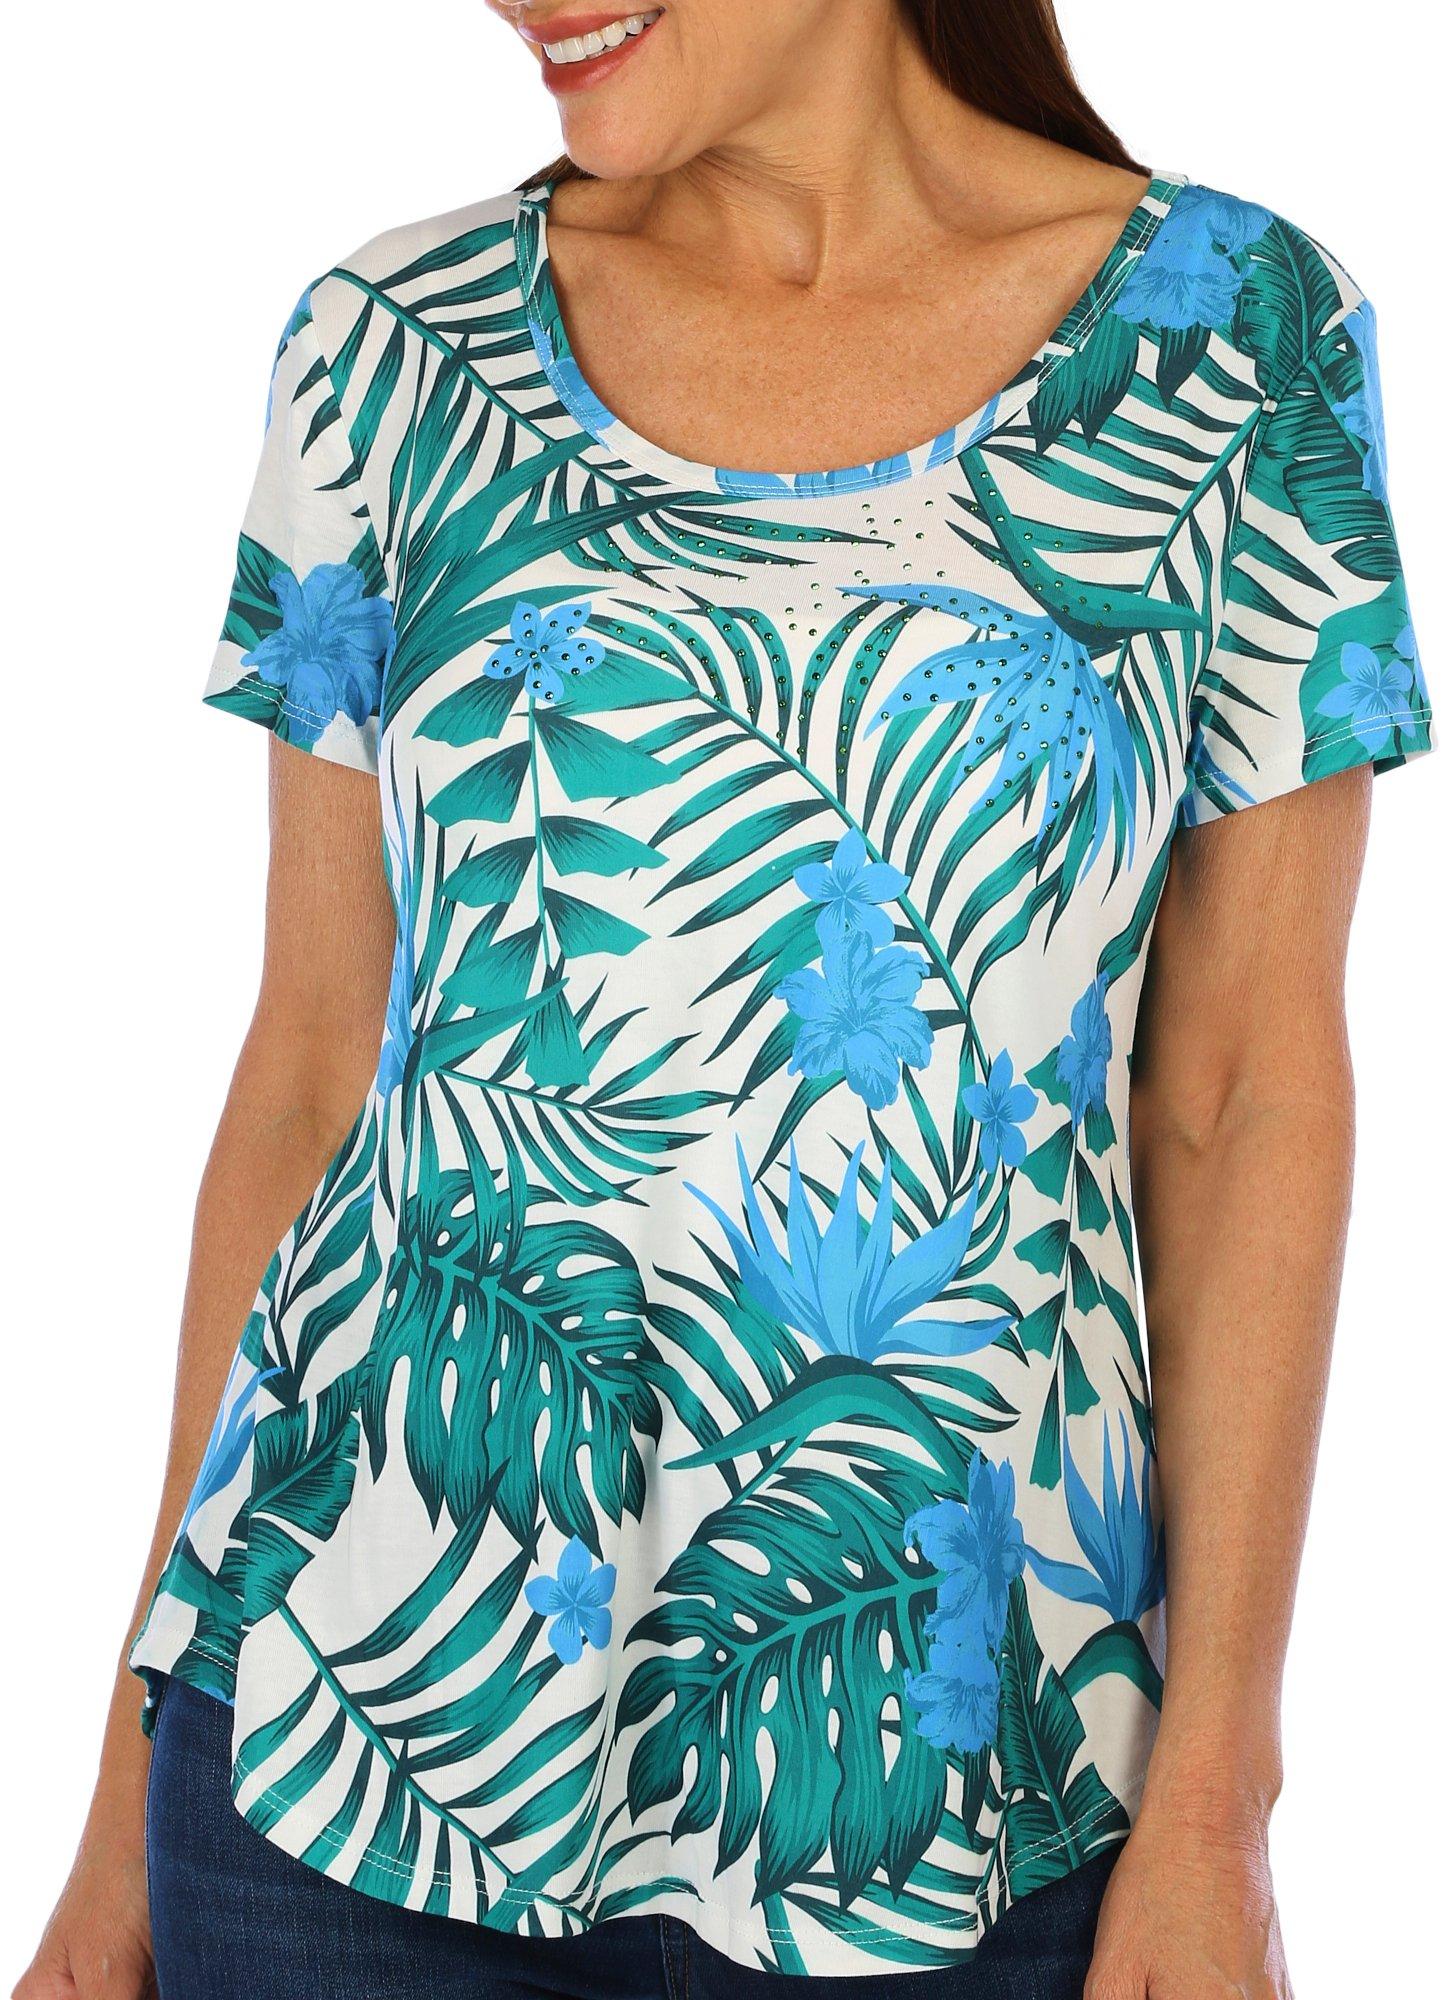 Womens Short Sleeve Tropical Embellished Top